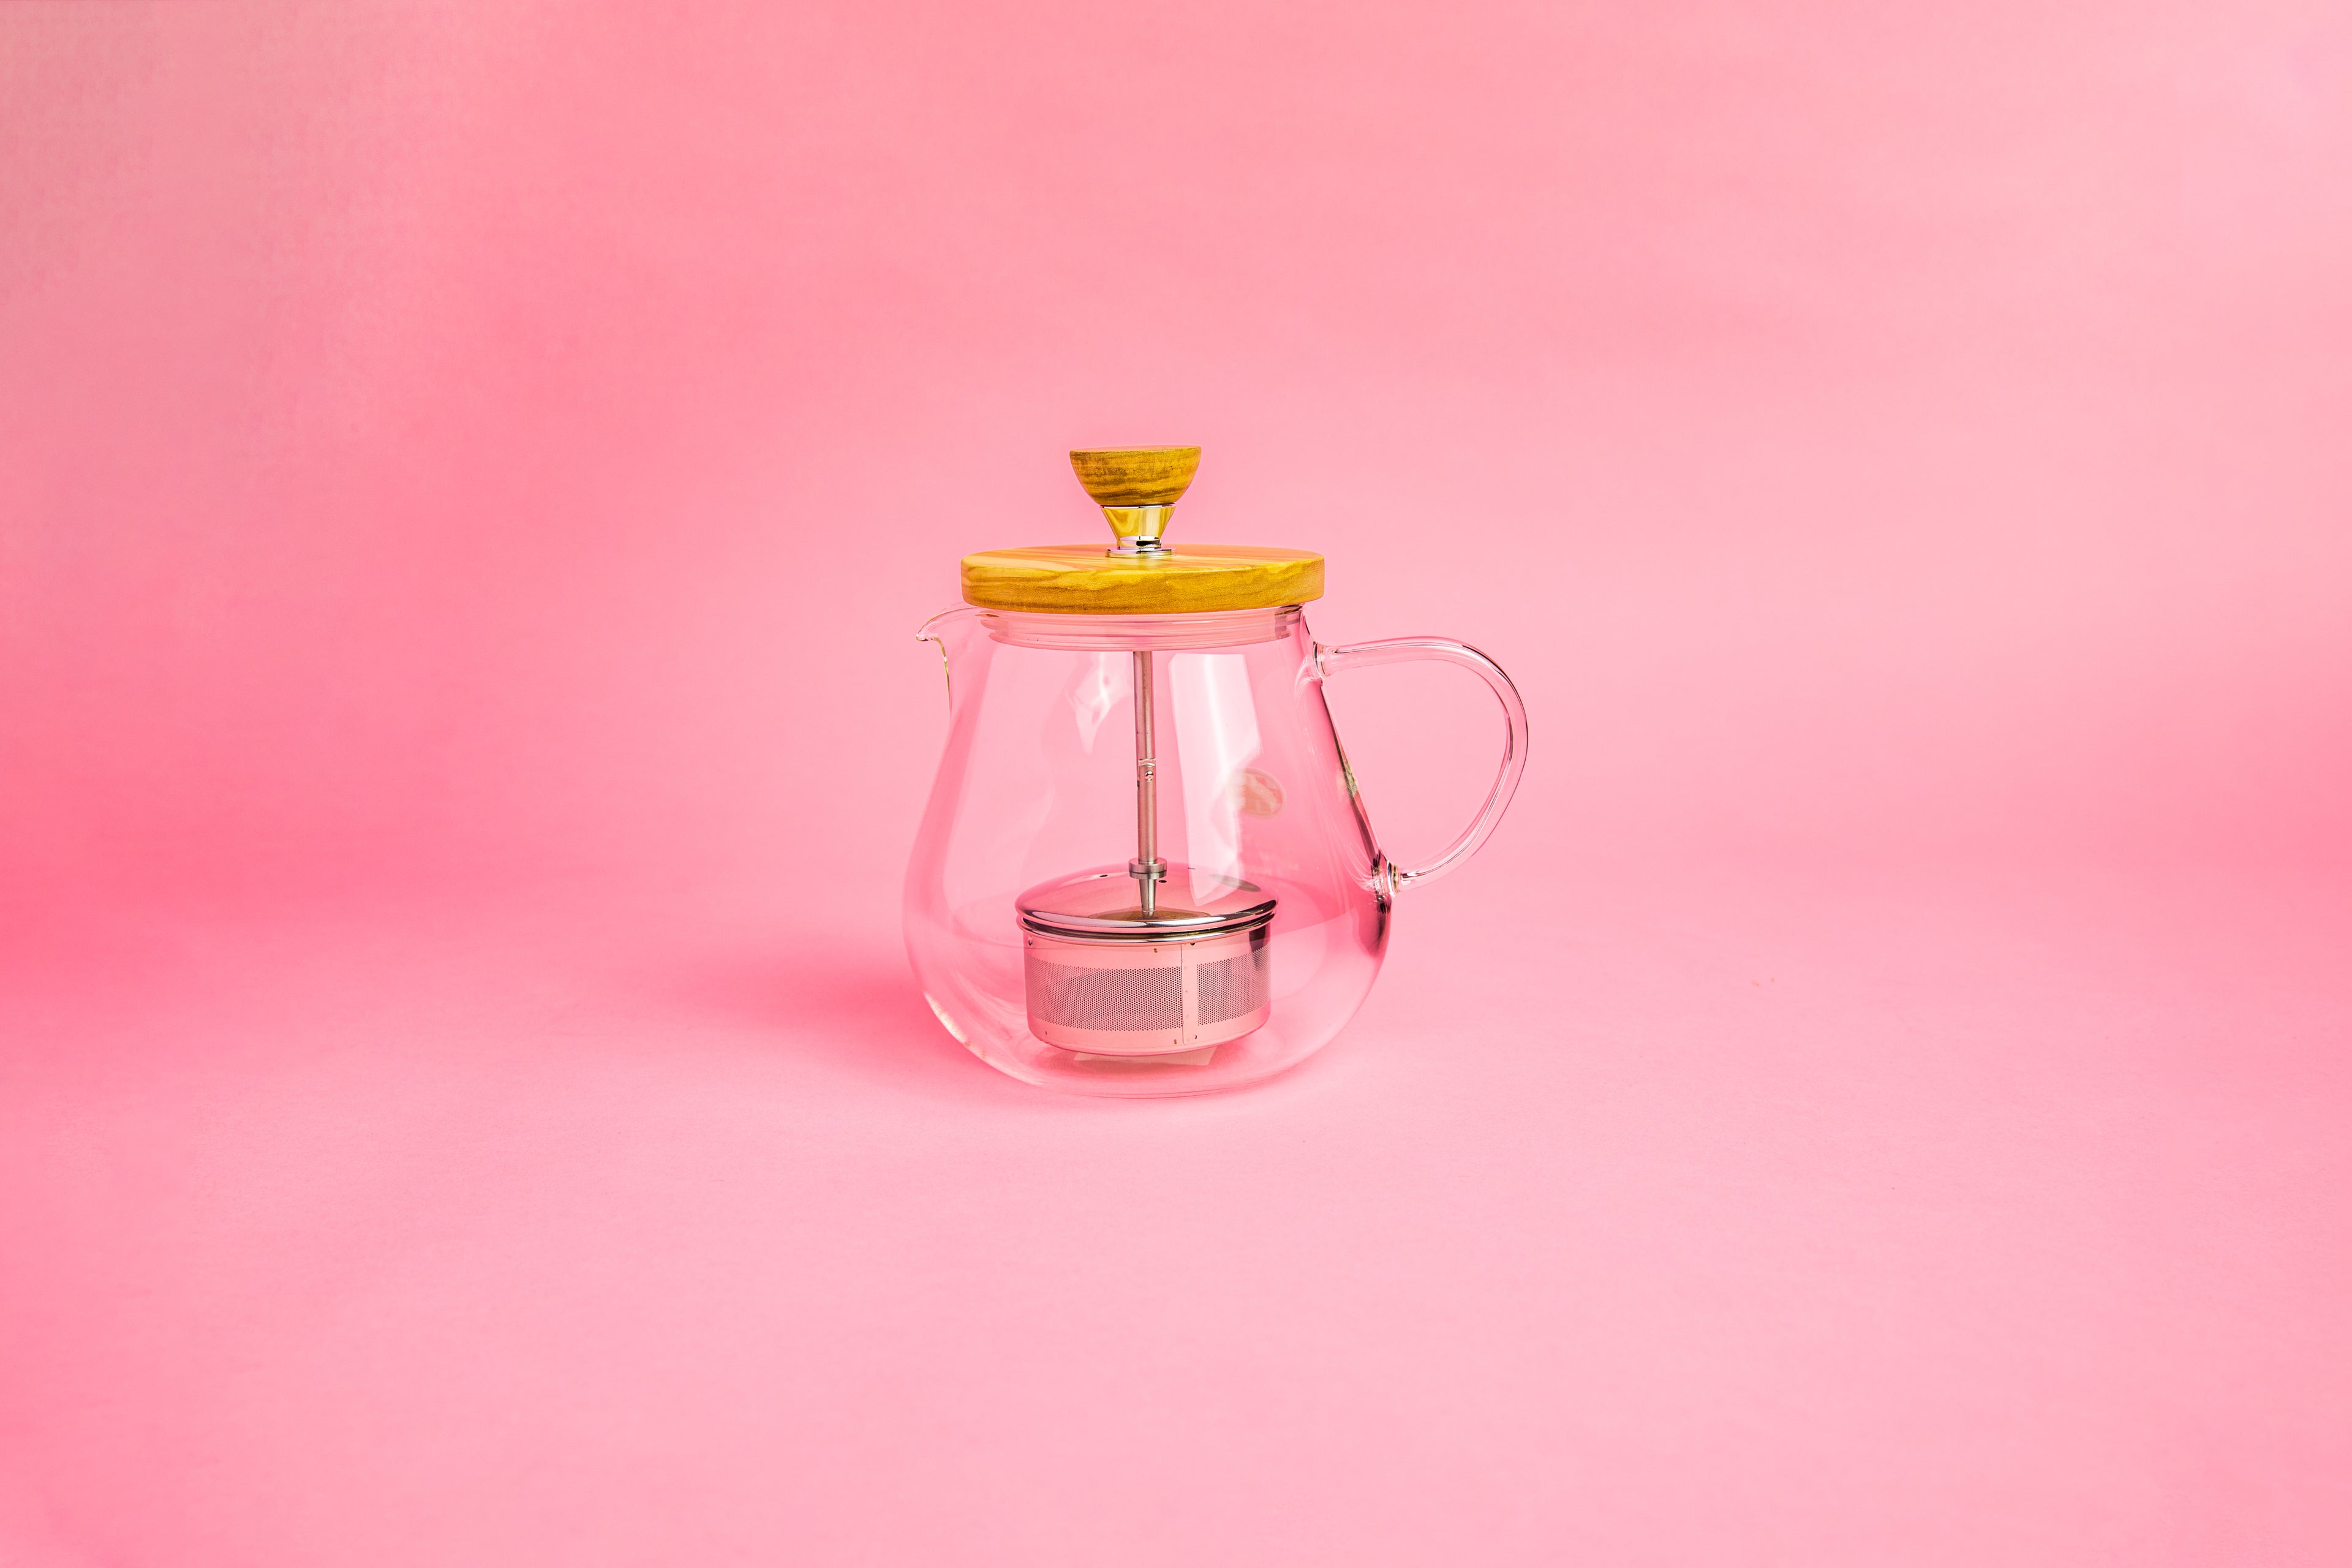 Glass teapot with glass handle. Olive wood lid and knob. Stainless steel plunger with metal tea filter basket . set on pink gradient background